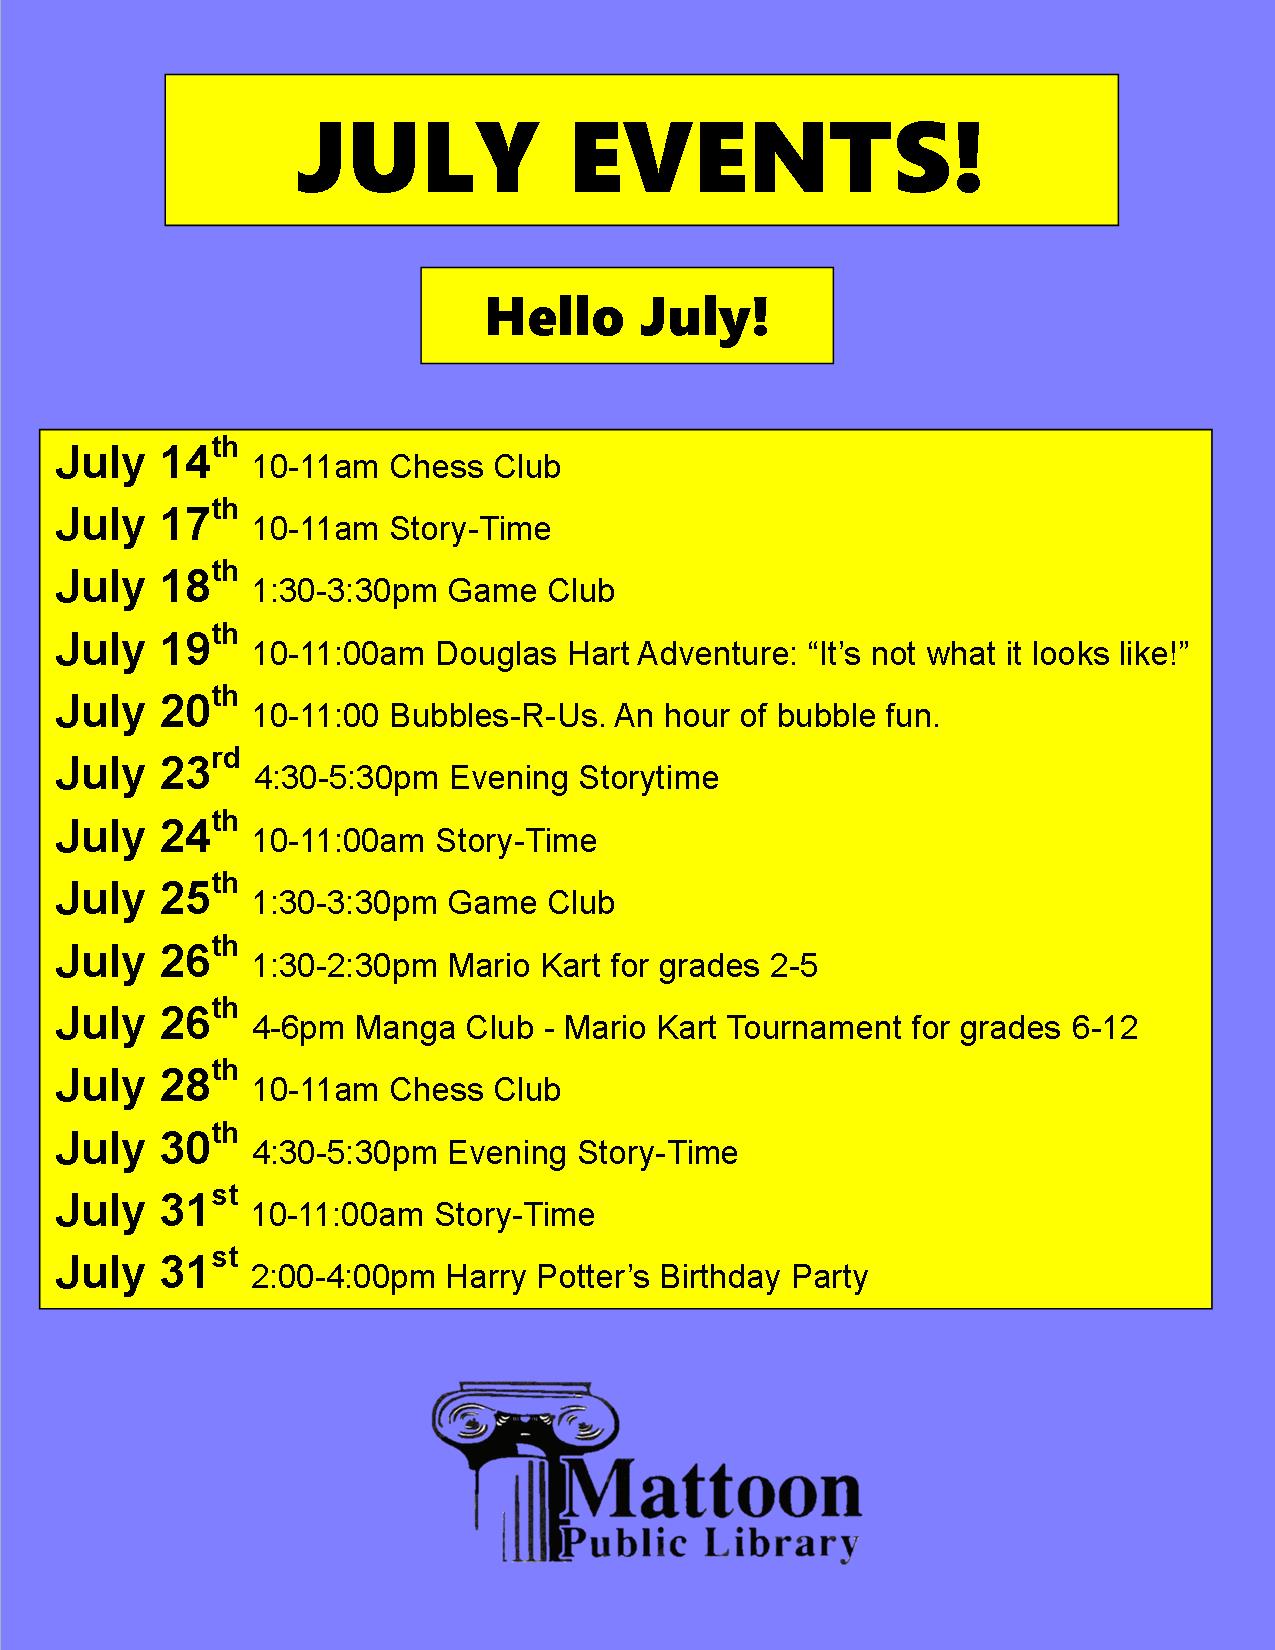 July Events flyer Mattoon Public Library